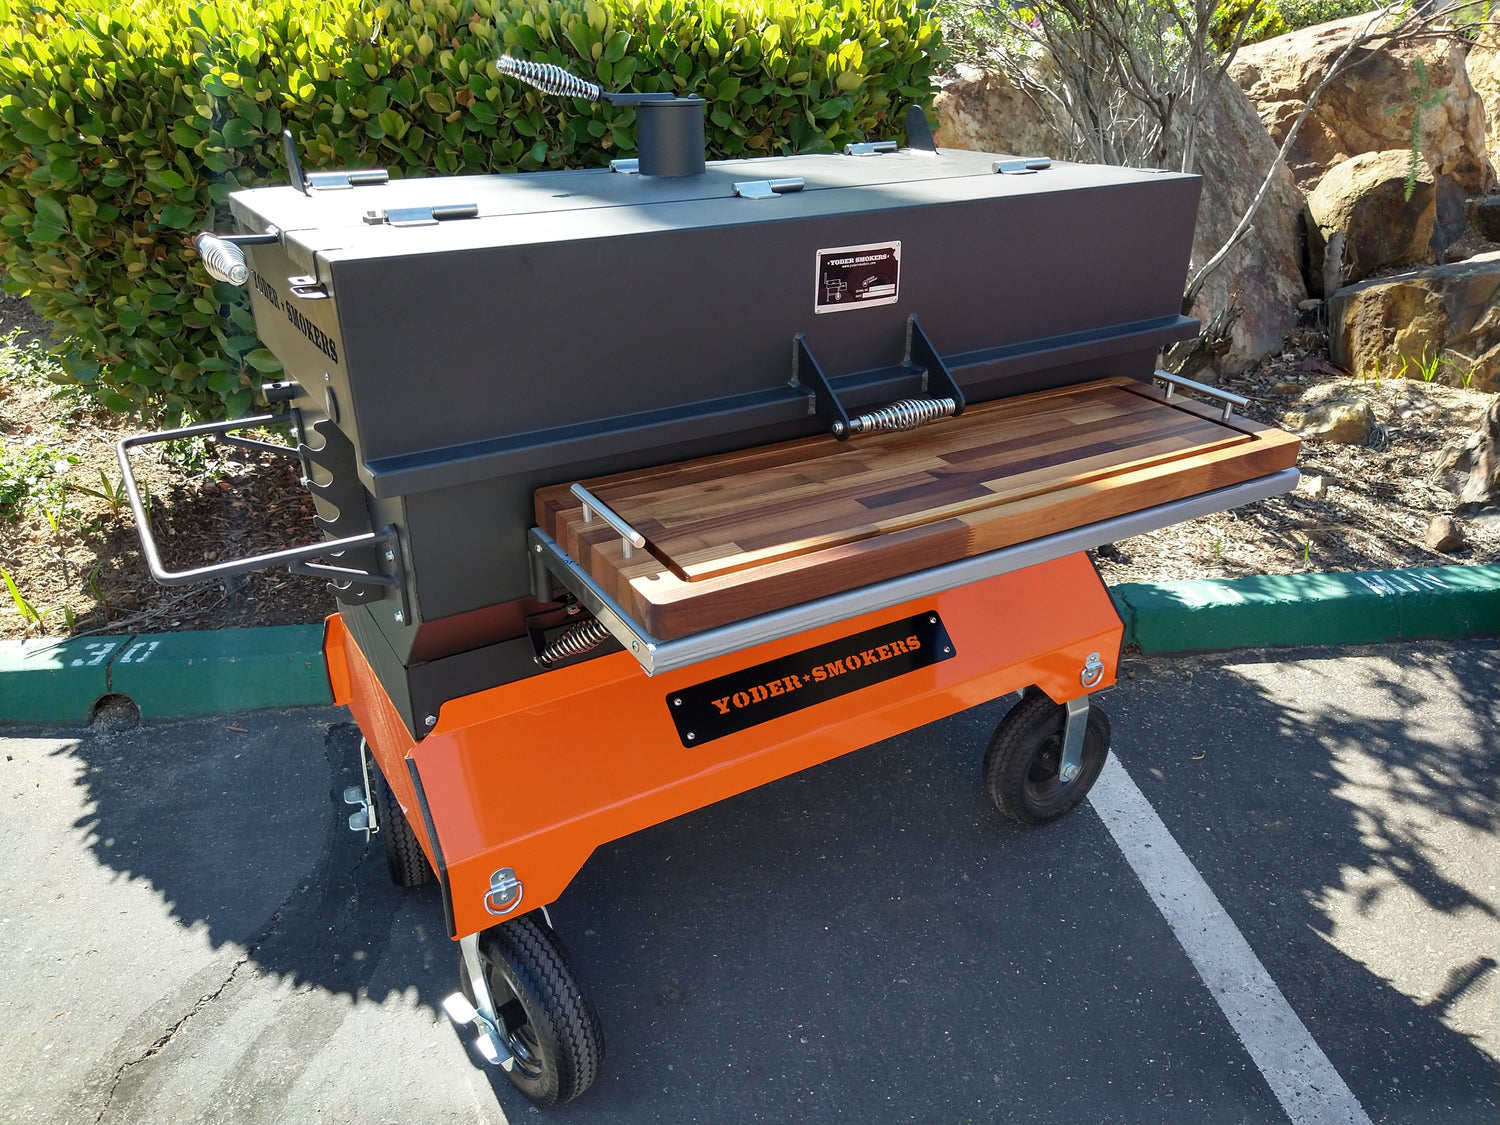 BBQ Boards® for Yoder Smokers